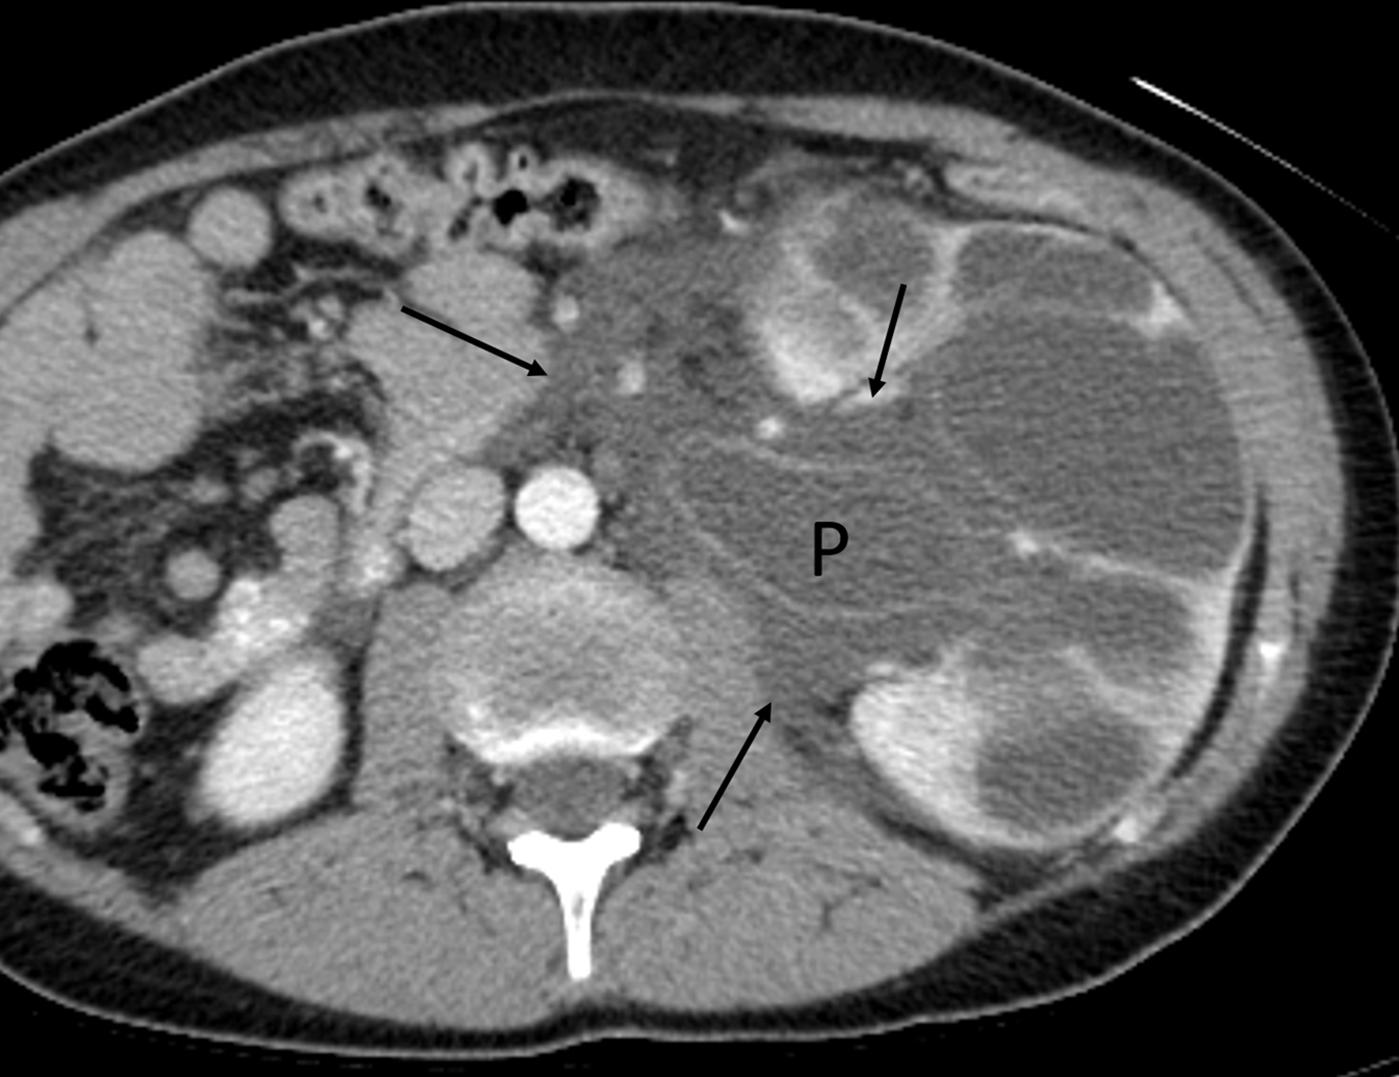 Figure 6-12, Renal injury to child with UPJ obstruction following trauma.